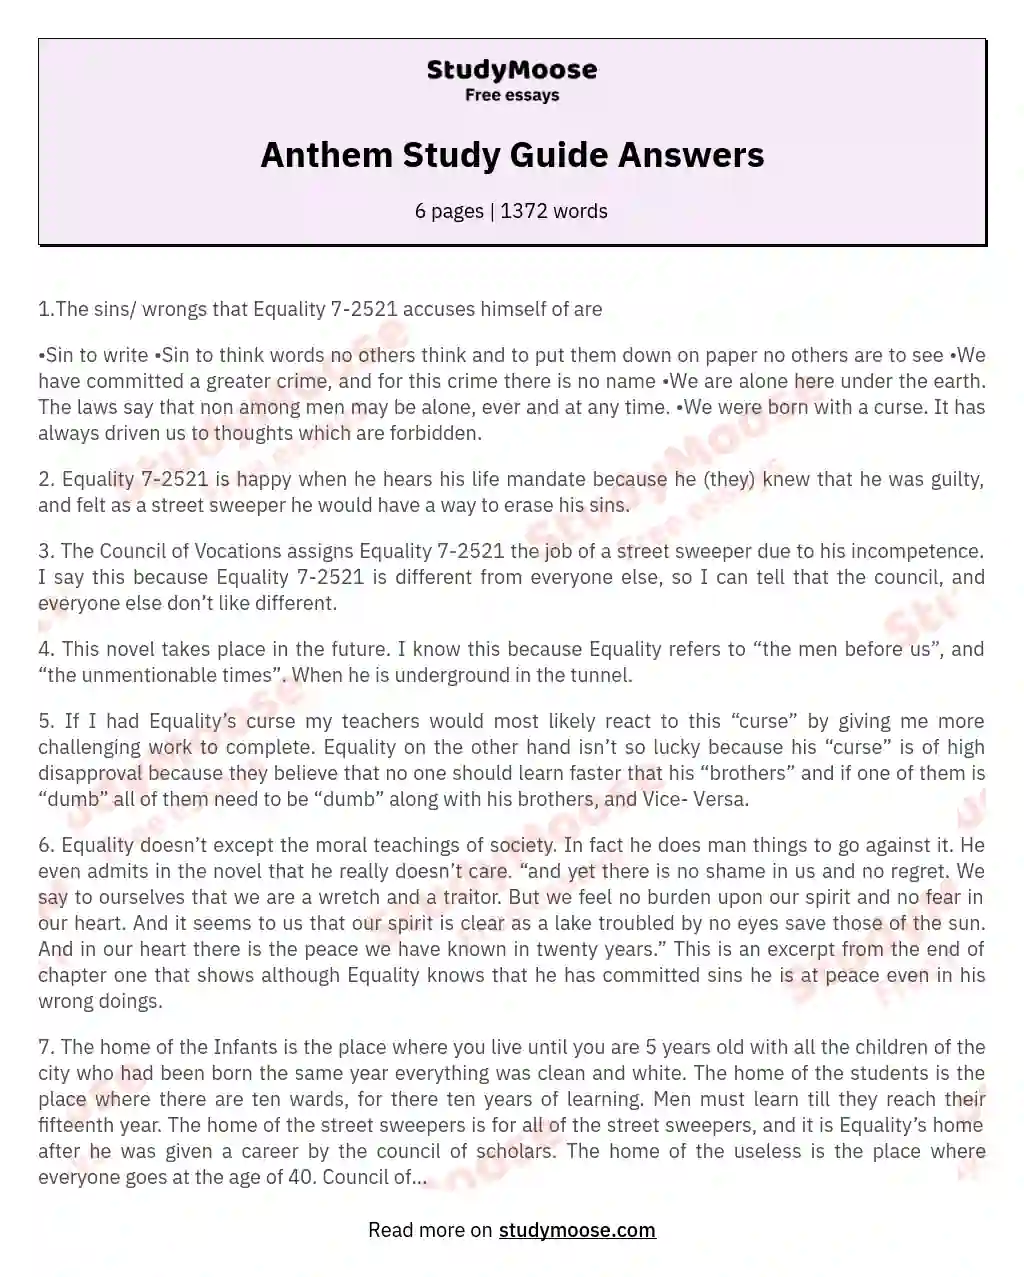 Anthem Study Guide Answers essay